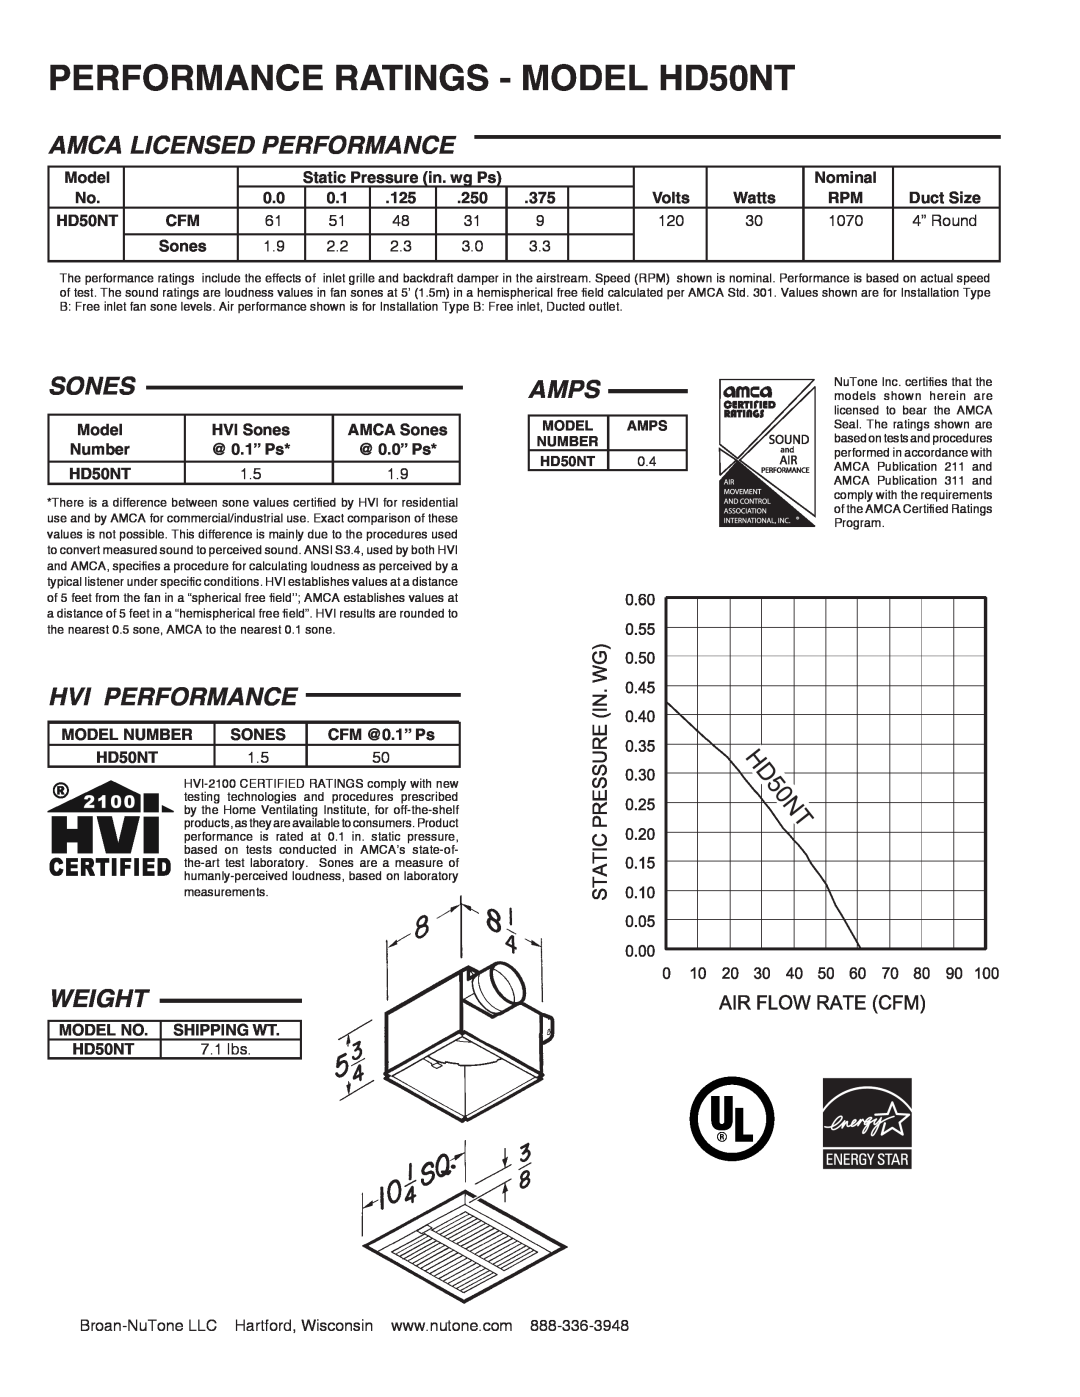 NuTone dimensions PERFORMANCE RATINGS - MODEL HD50NT, Amca Licensed Performance, Sones, Amps, Hvi Performance, Weight 